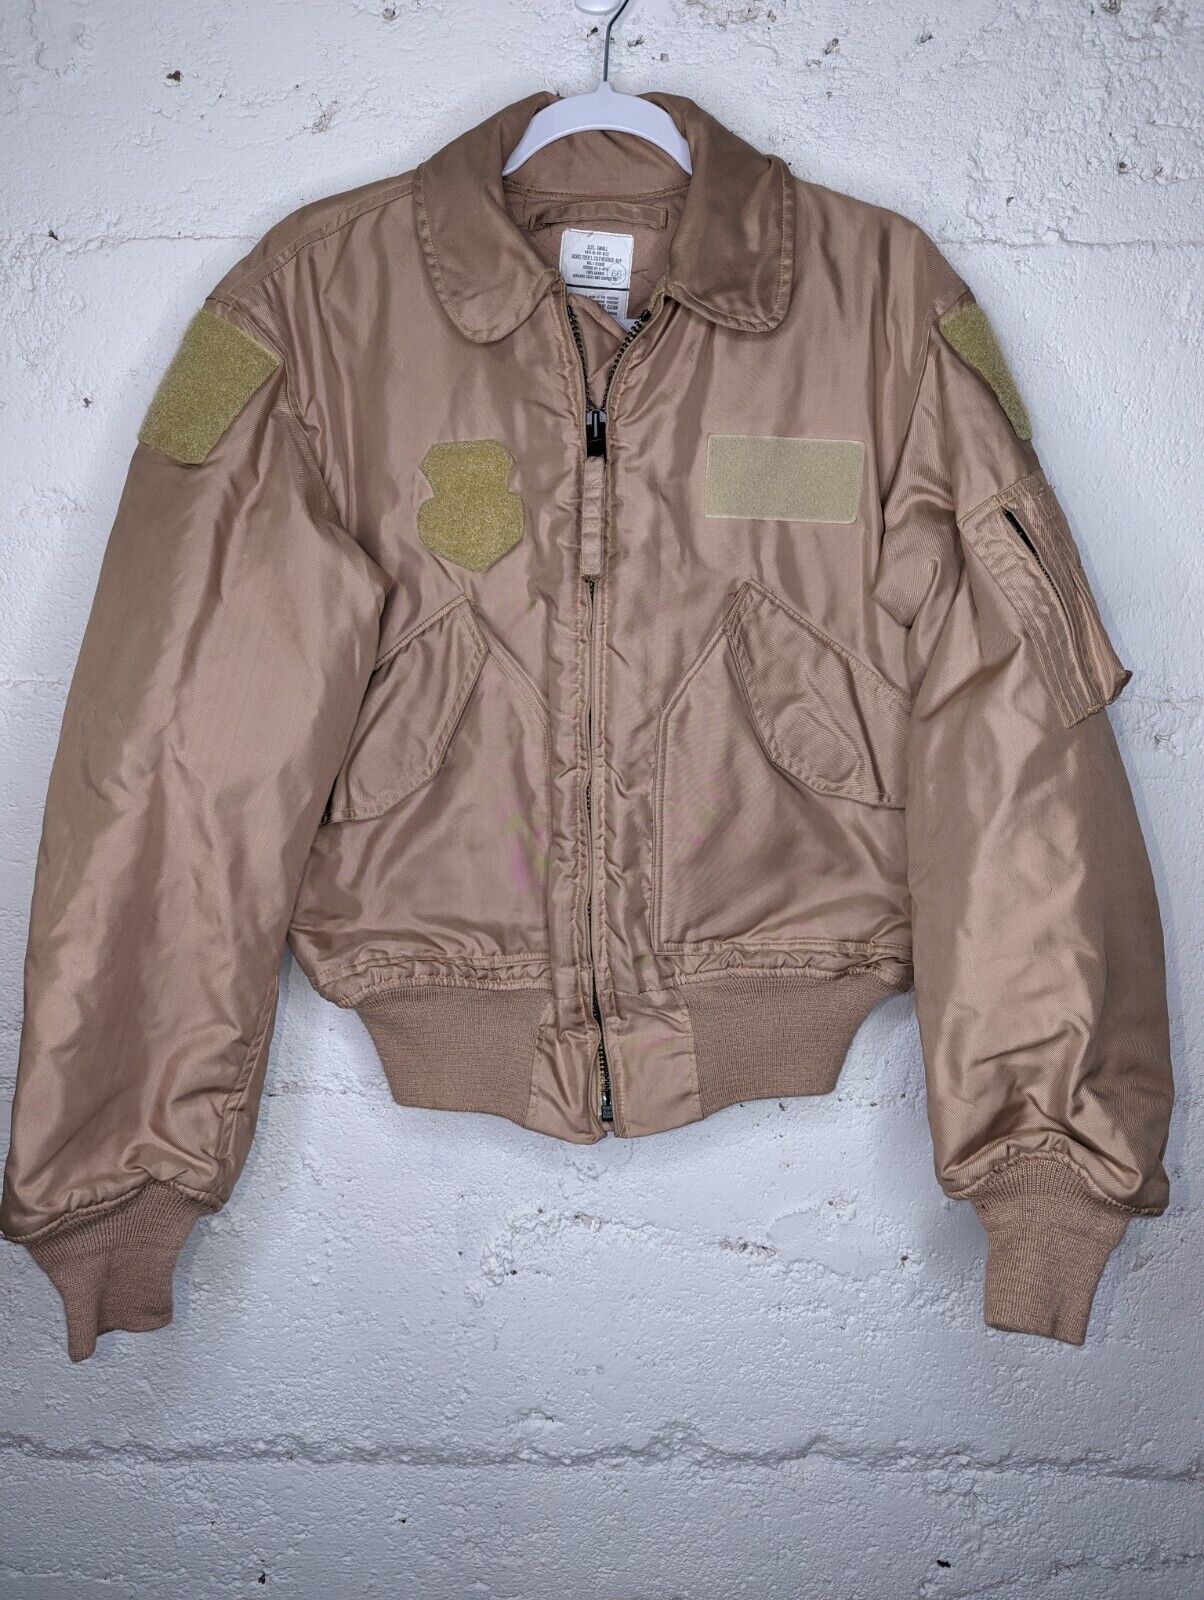 MILTARY JACKET FLYERS COLD WEATHER 45/P ARAMID TAN Small 21X25 👀🔥 